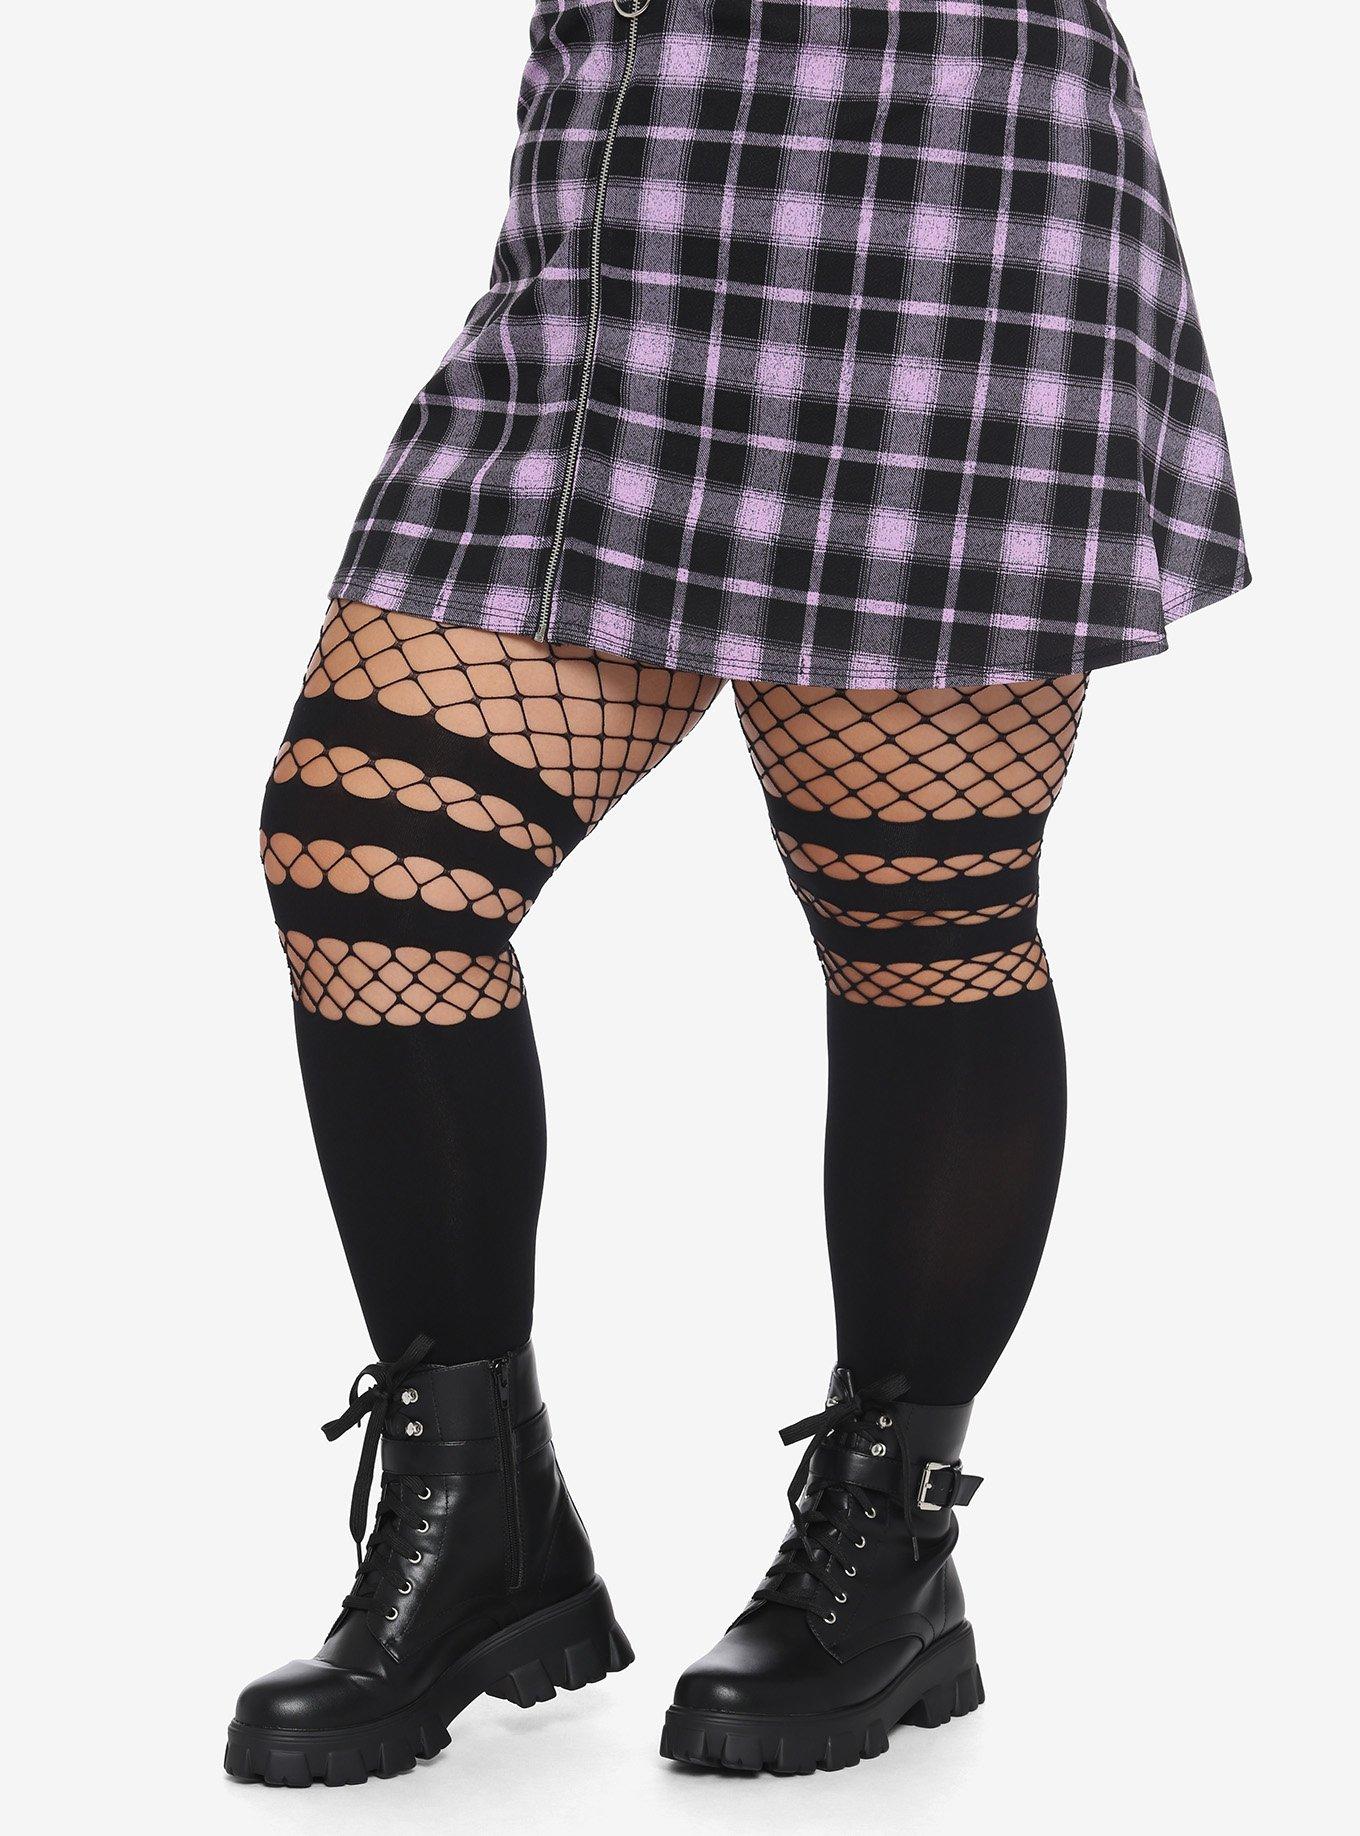 New arrival Mock Suspender Tights Women Fake Thigh High Open